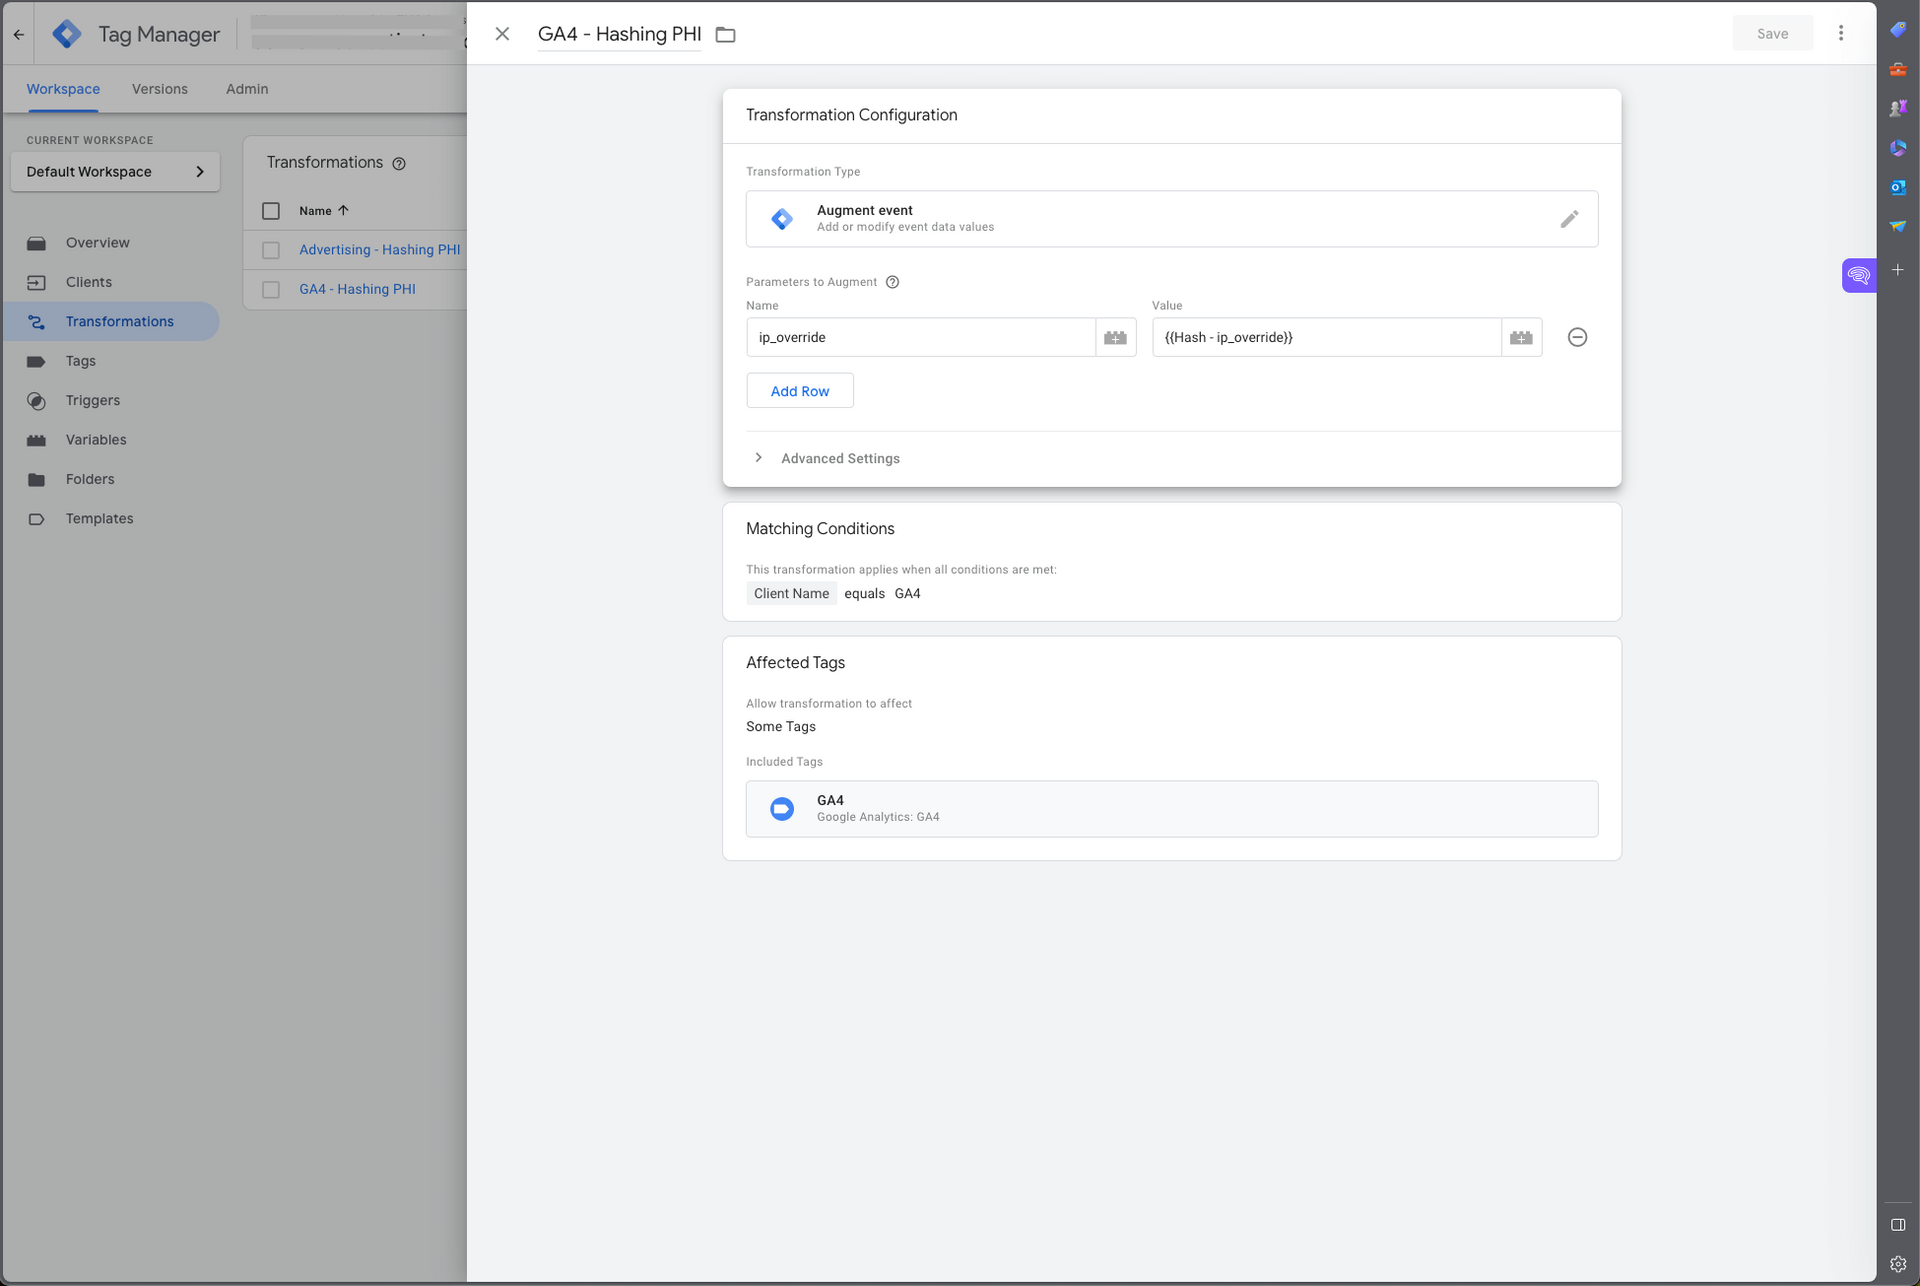 Screenshot of Google Tag Manager showing a transformation hashing PHI for HIPAA compliance.